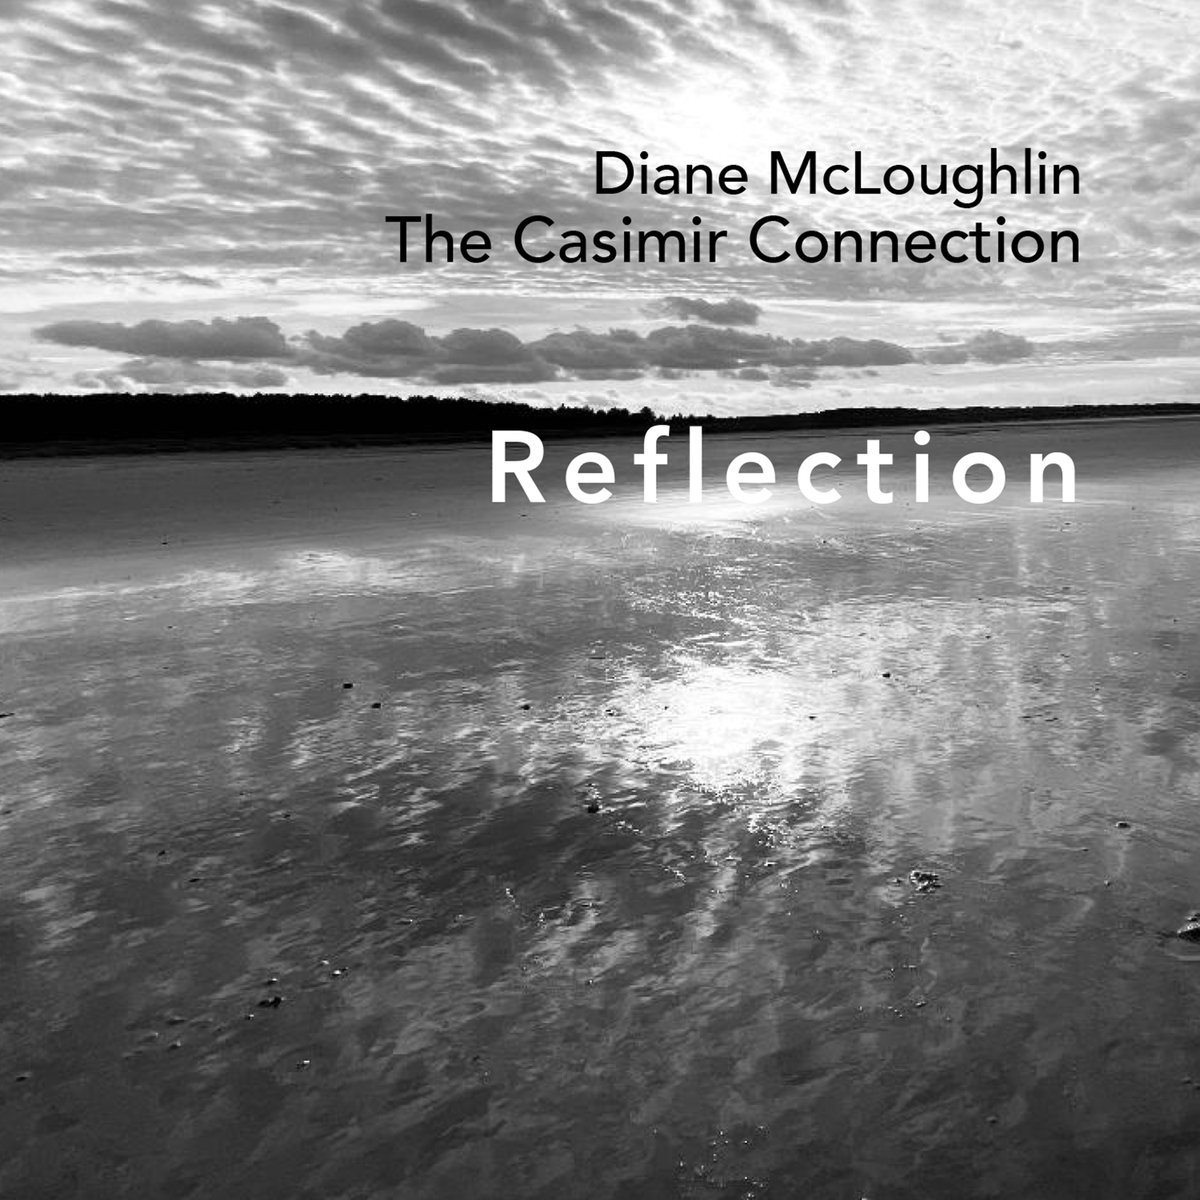 New album ‘Reflection’ @casimirconnect is out now via @calibansounds Listen here → caliban.lnk.to/reflection